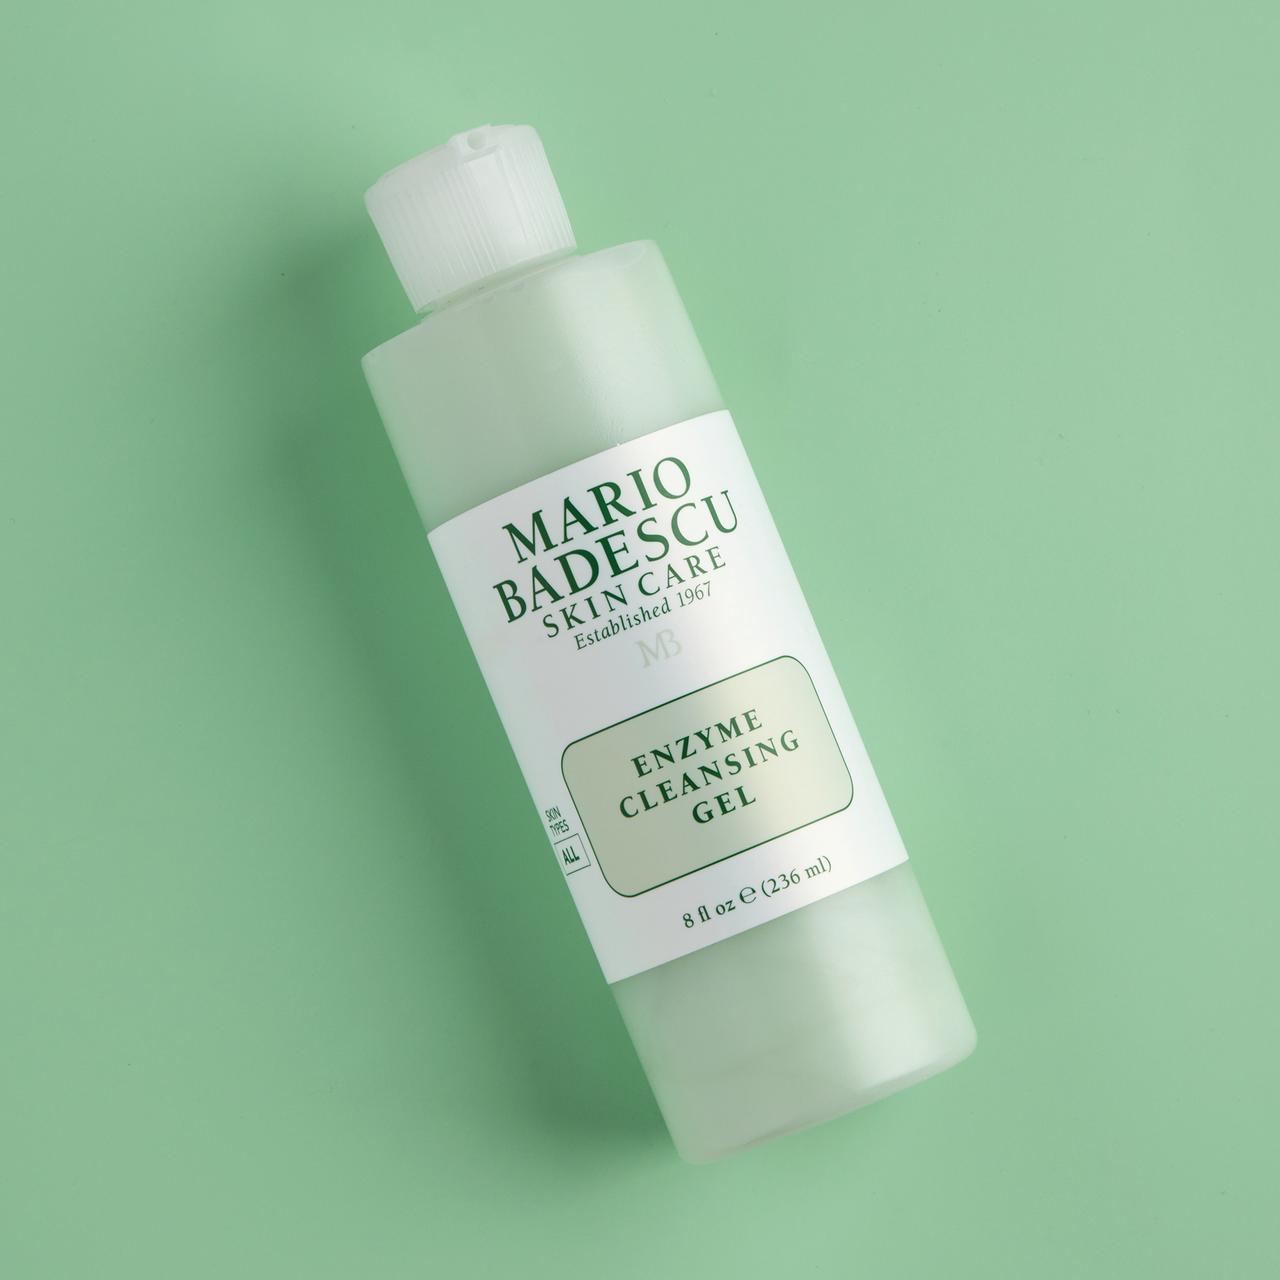 Mario Badescu Enzyme Cleansing Skin Care Face Wash Gel, 16 fl oz - image 5 of 5